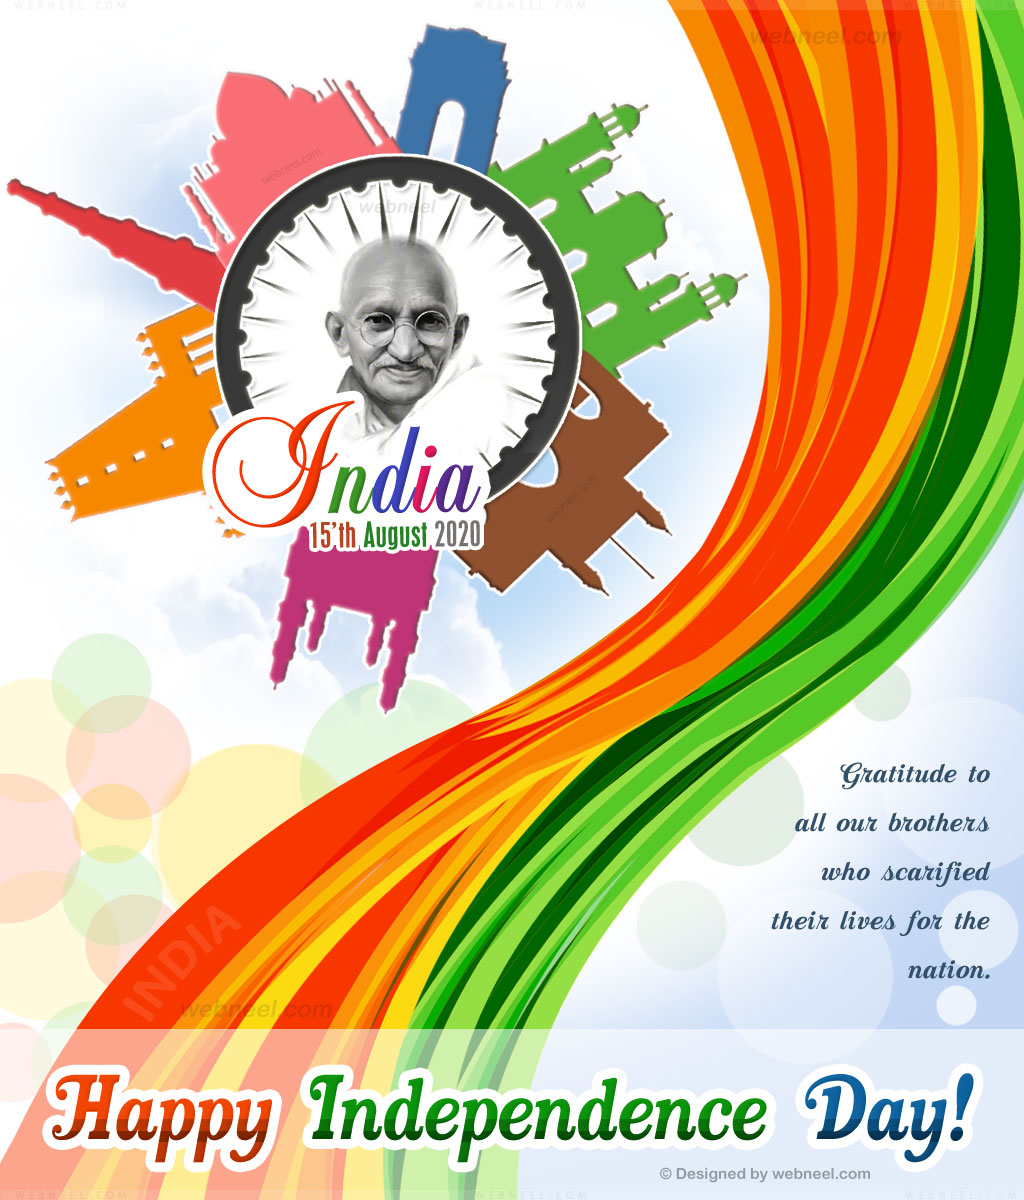 india independence day - photo #39